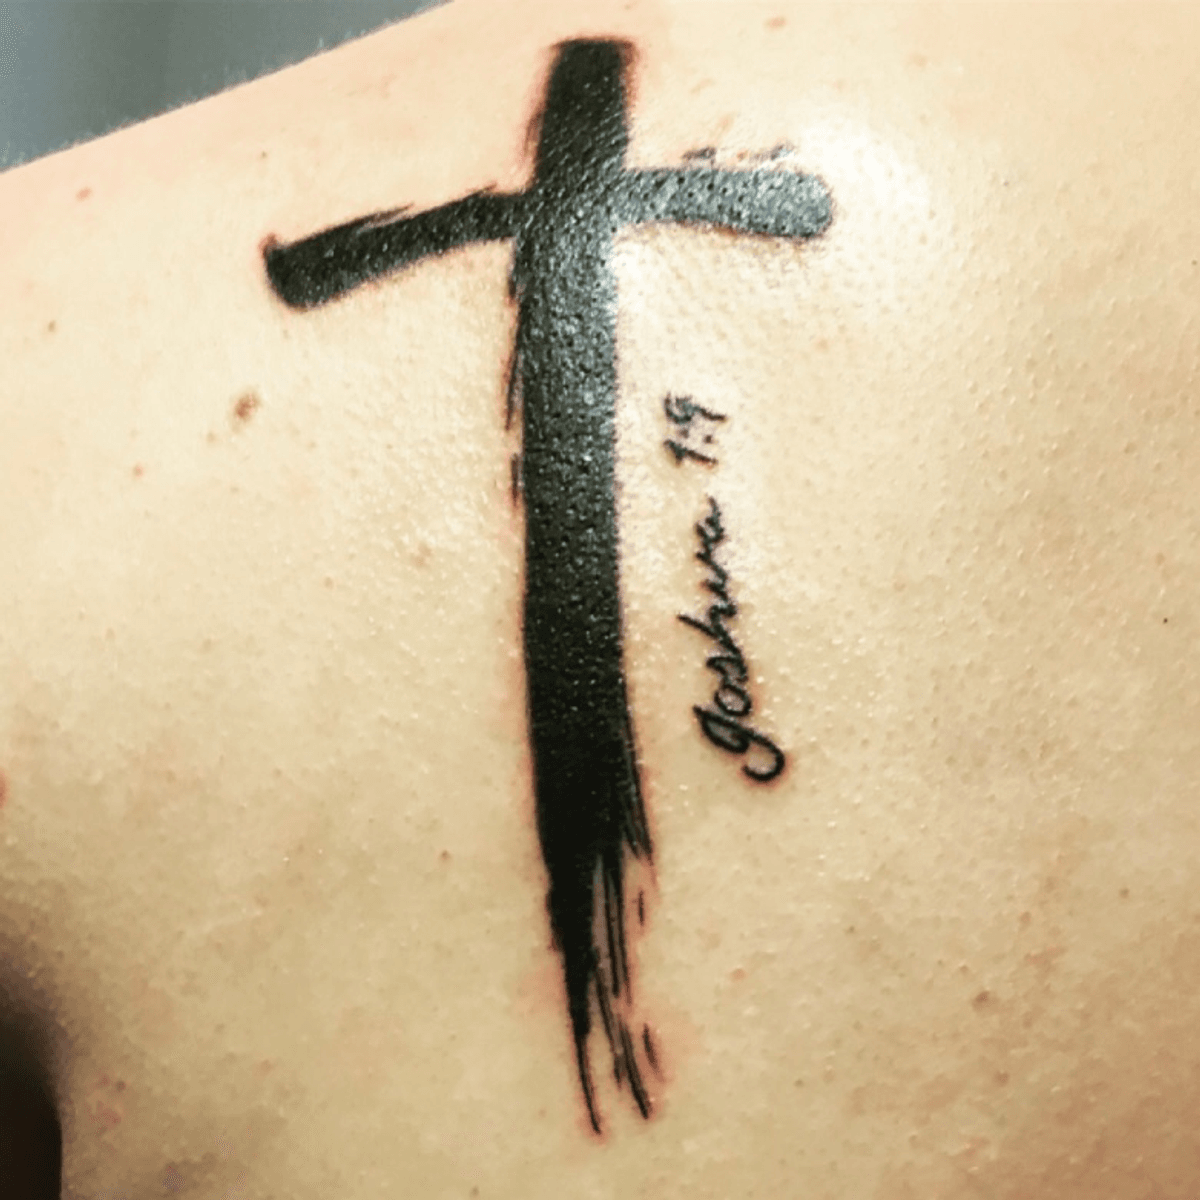 Tattoo uploaded by Blake Carraher • Cross with Joshua 1:9 on side ...